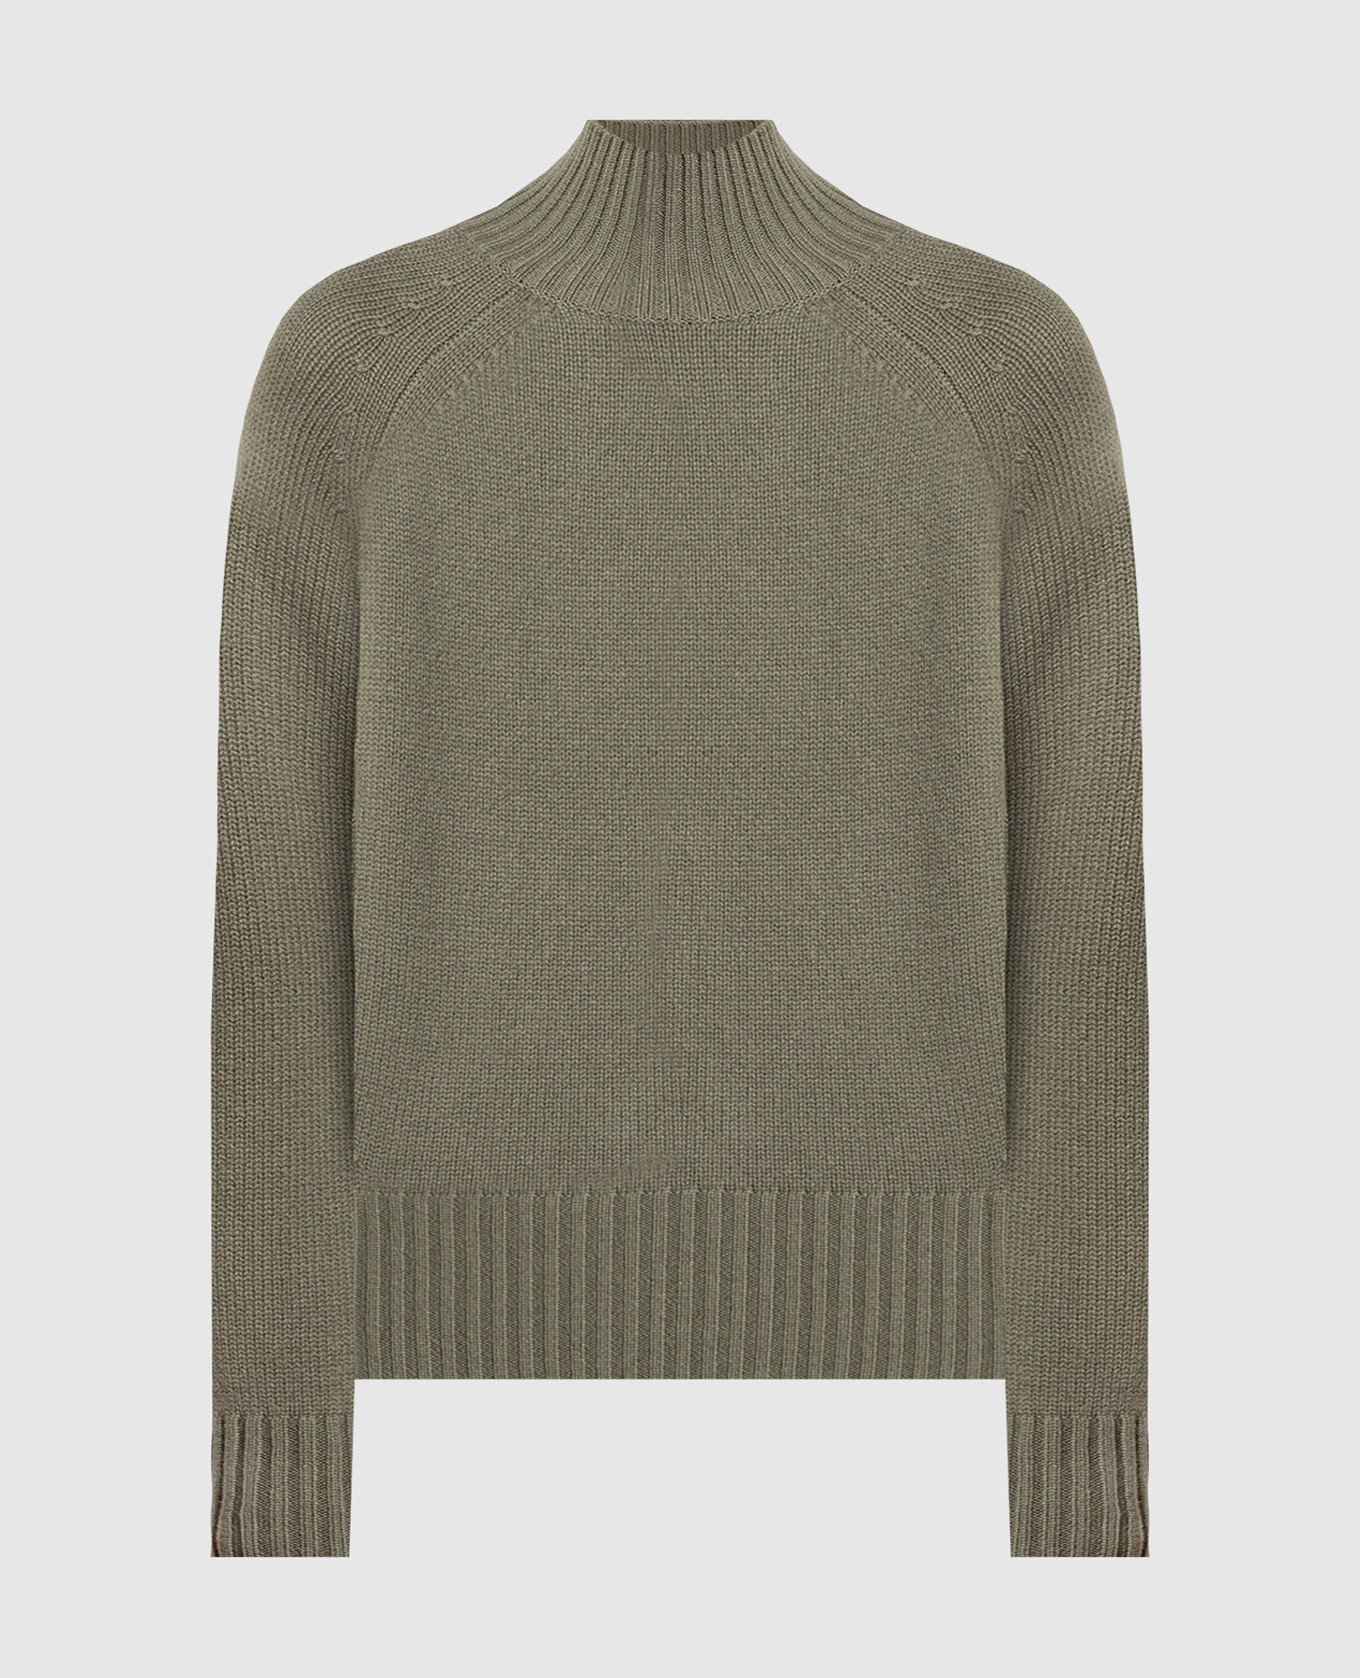 Green sweater in wool and cashmere with a textured pattern